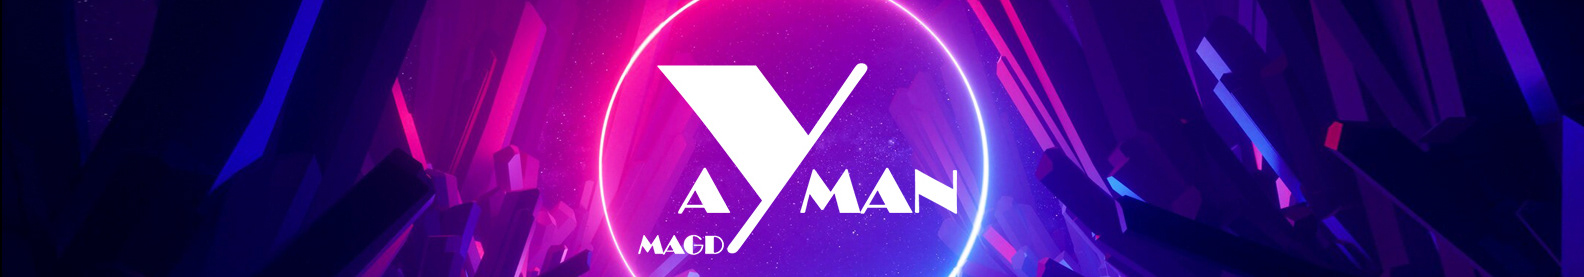 Ayman Magdy's profile banner